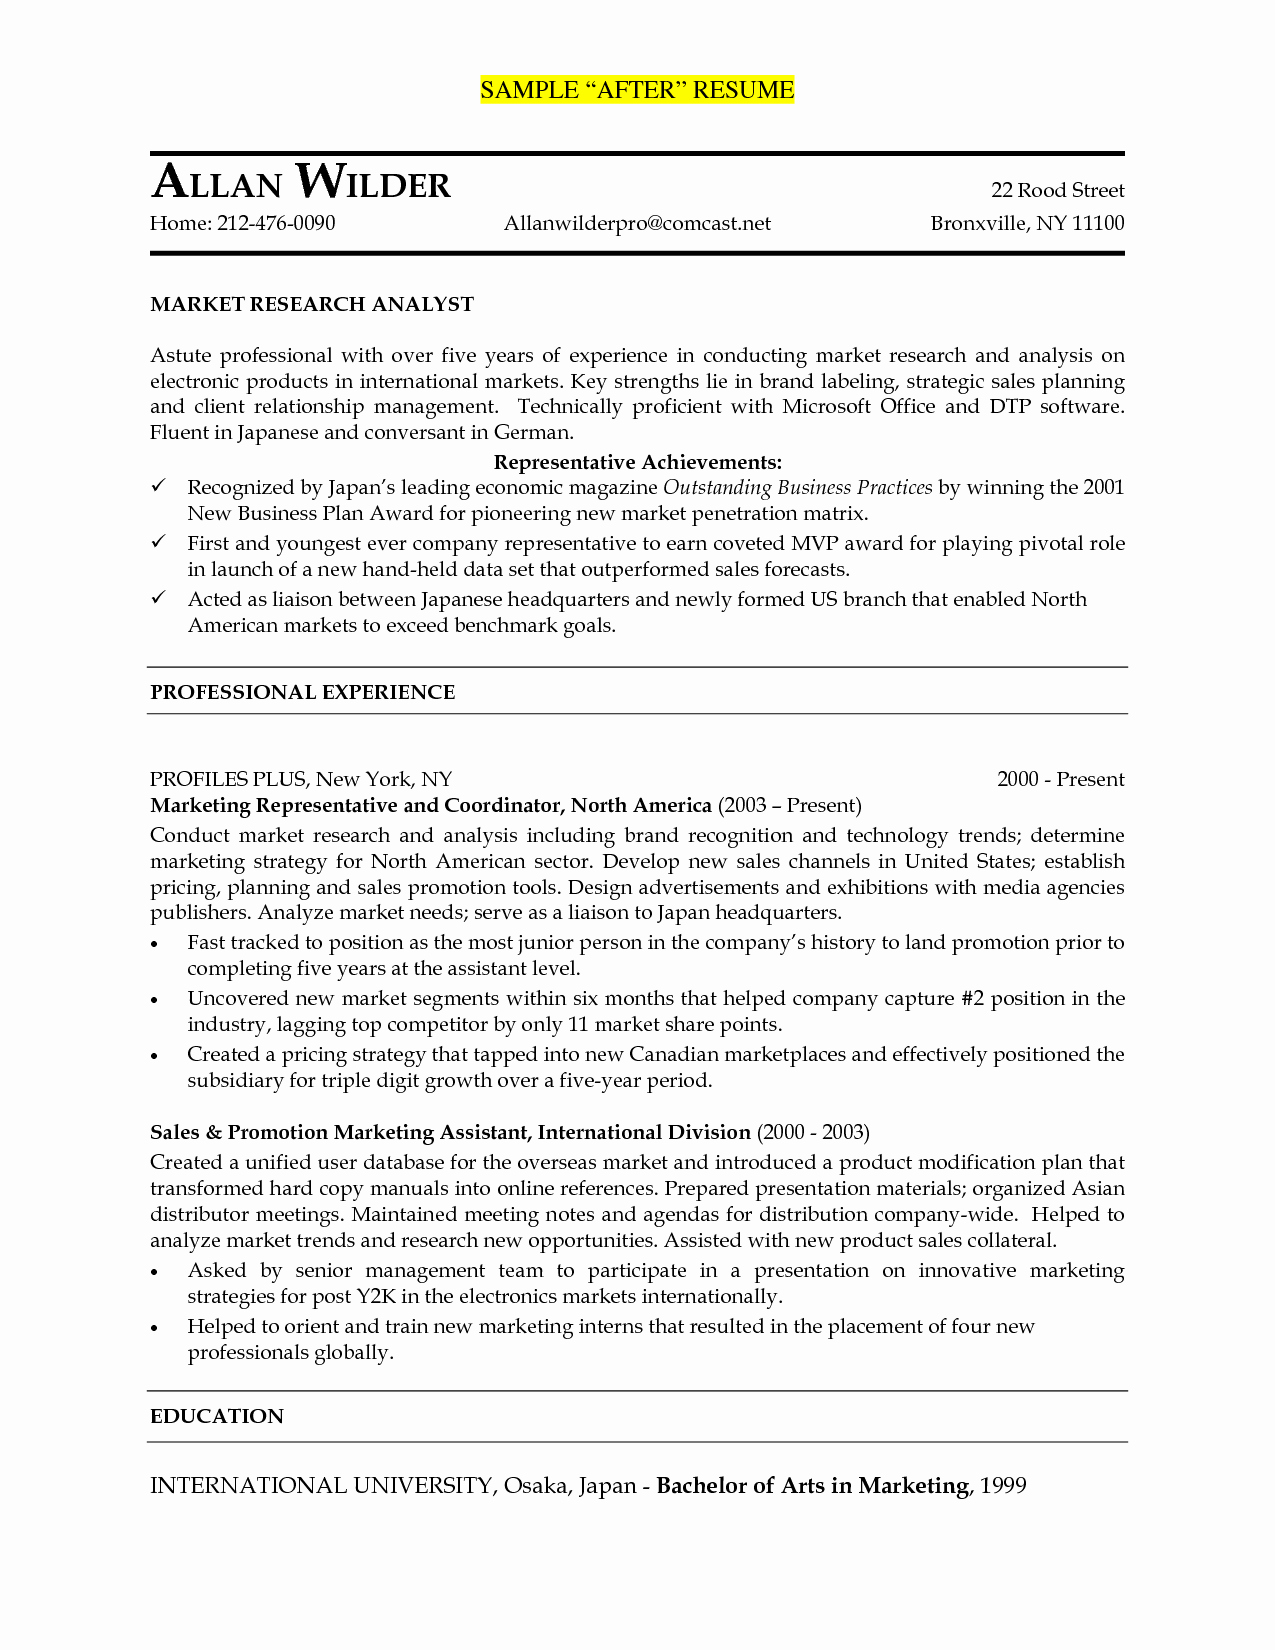 Resume Objective Examples Data Analysis 8